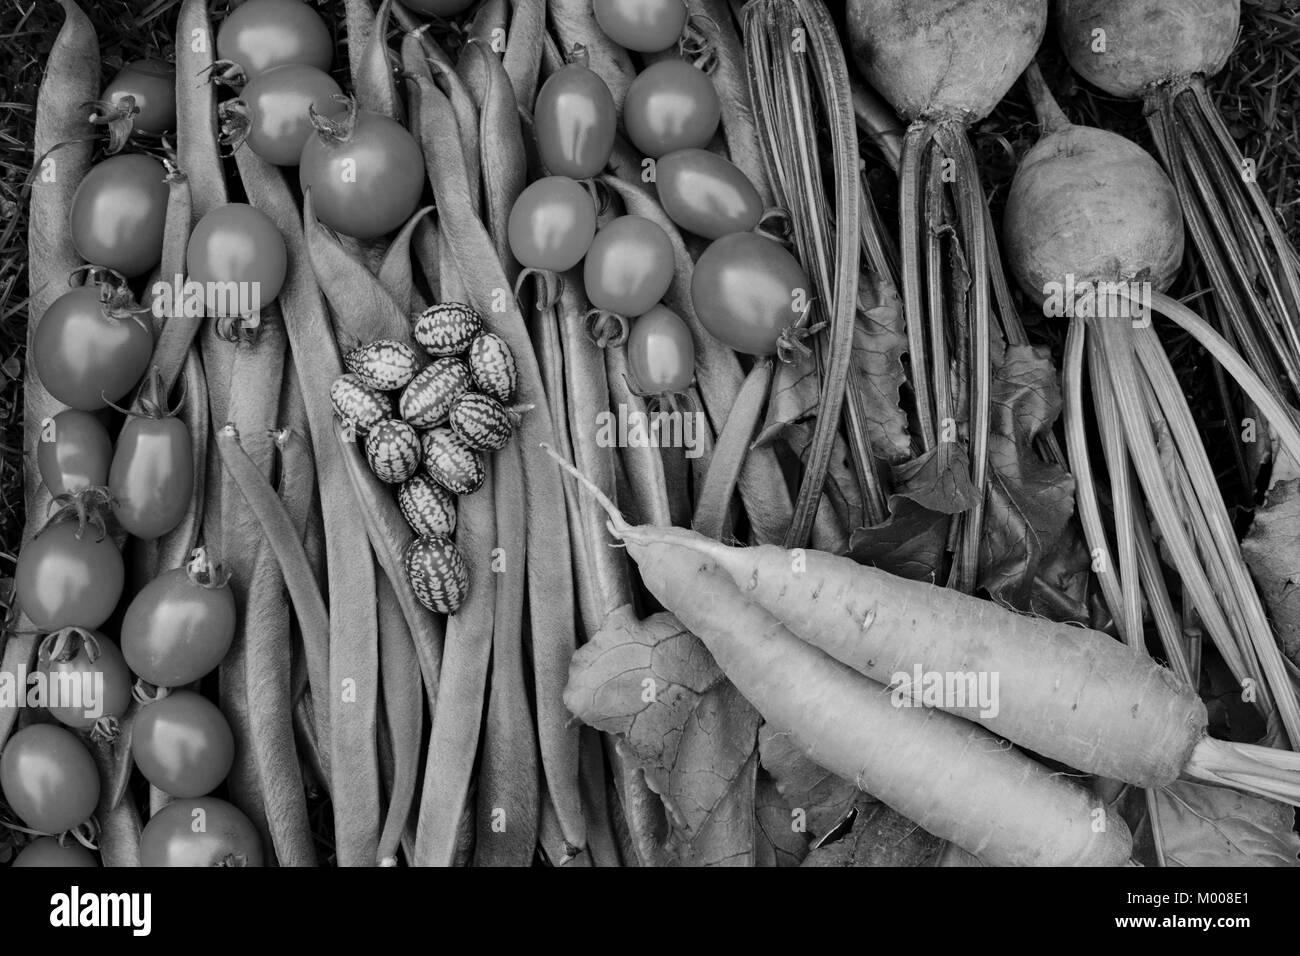 Ripe tomatoes, runner beans, carrots, beets and cucamelons freshly gathered from the allotment - monochrome processing Stock Photo